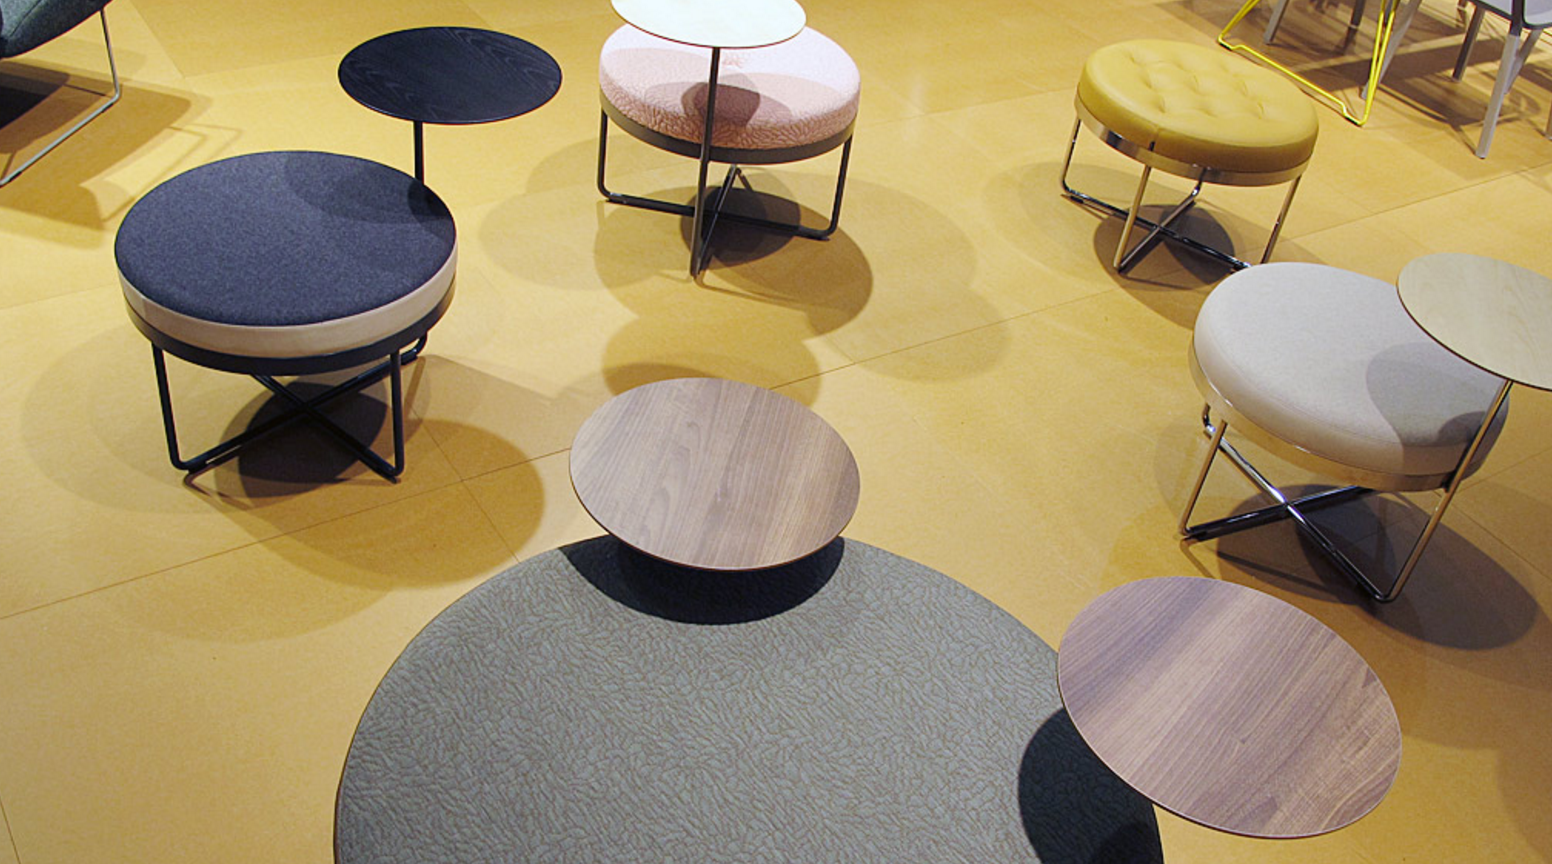 shima-seat-table-spaceist-blog-product-new